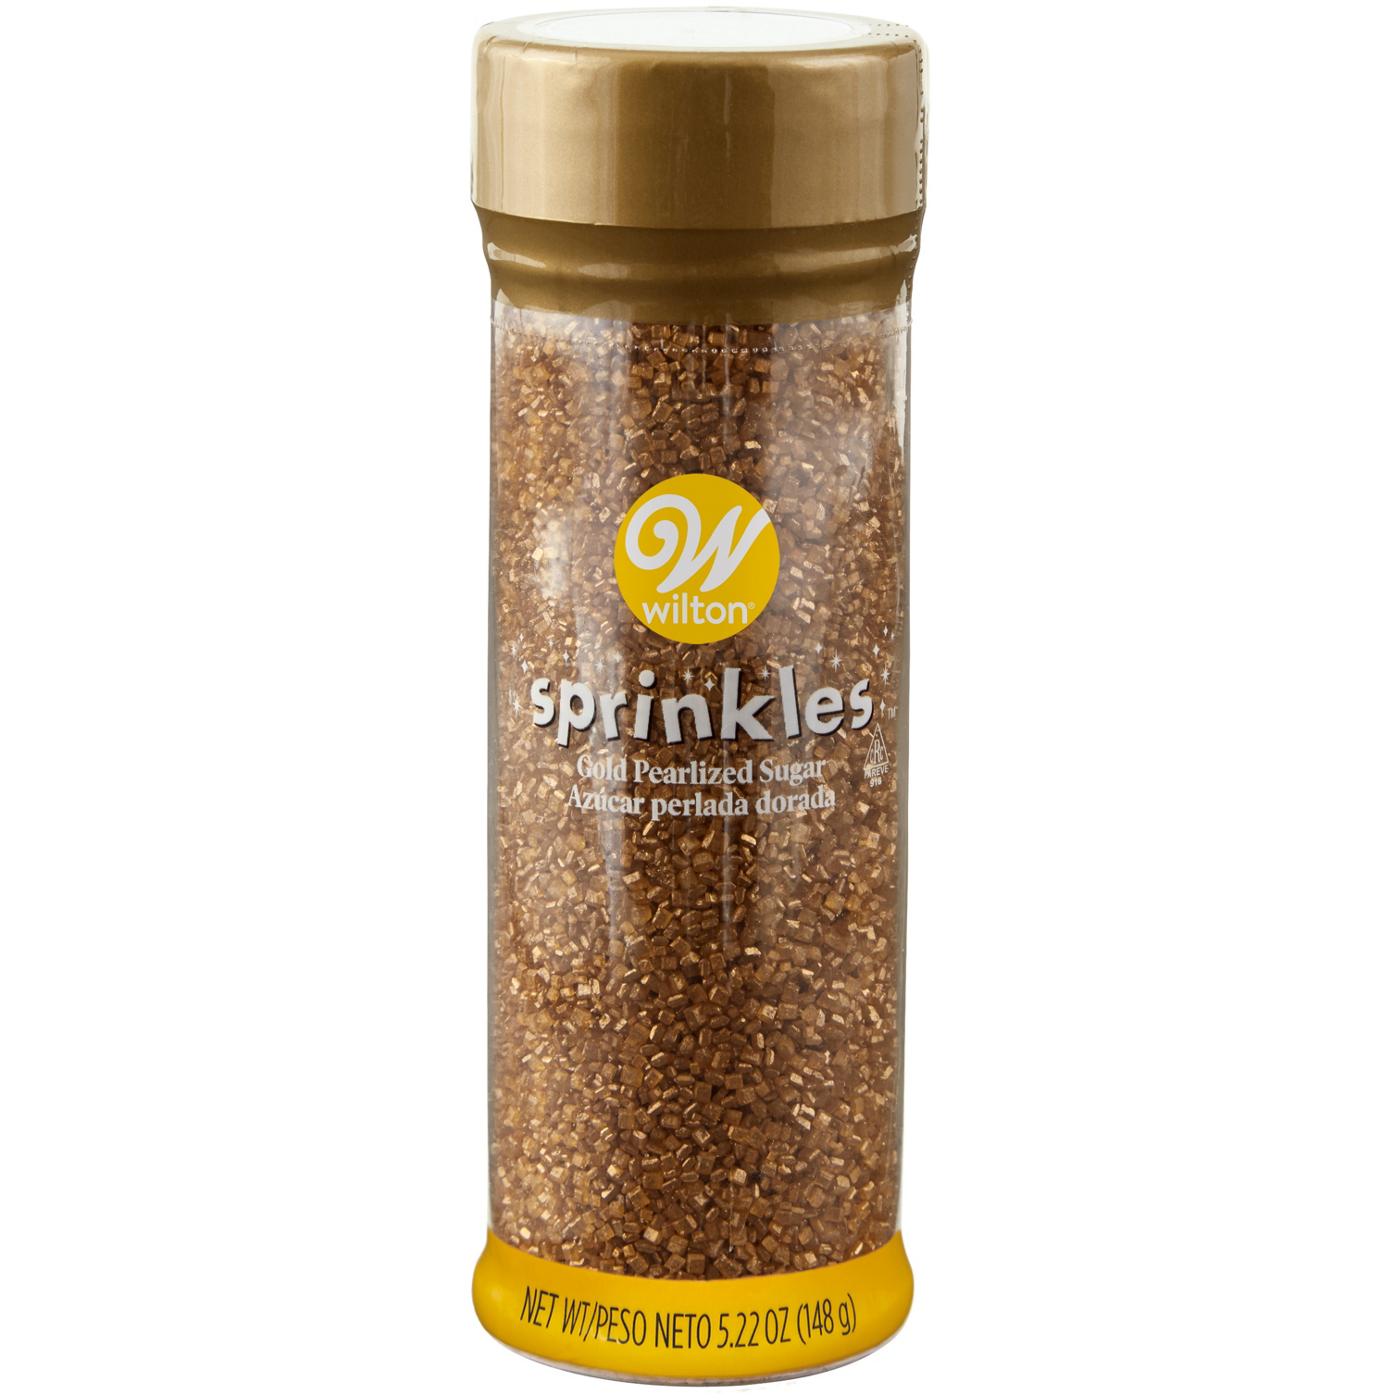 Gold Edible Glitter-Baking Supplies-Cakes, Cookies, Cupcakes